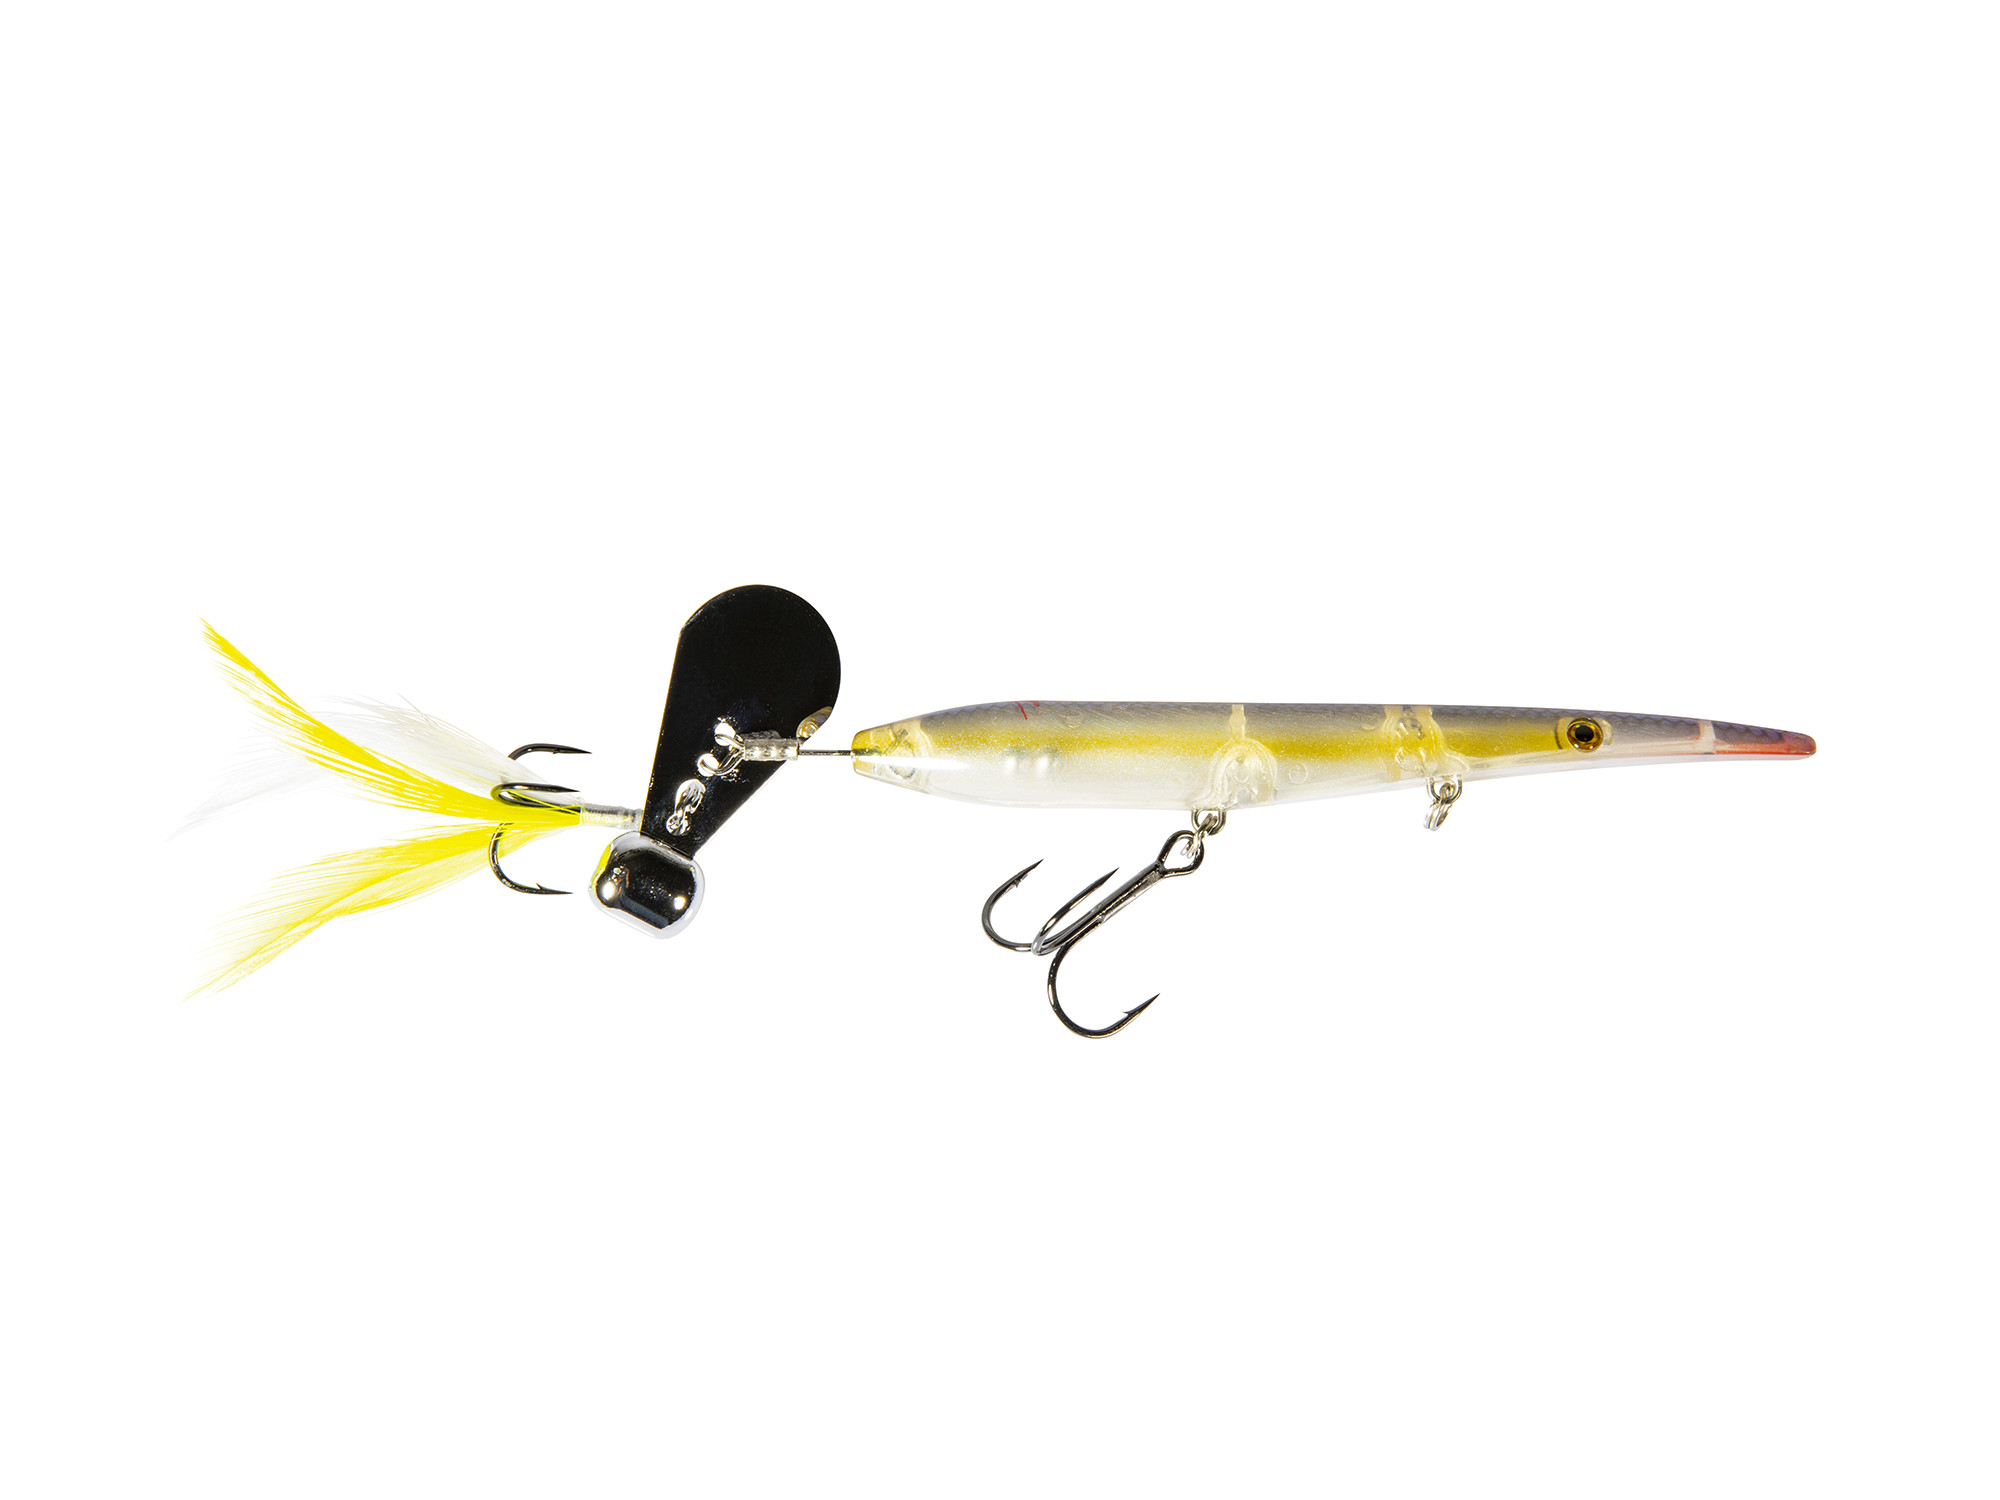 Z-Man All Saltwater Fishing Baits, Lures for sale